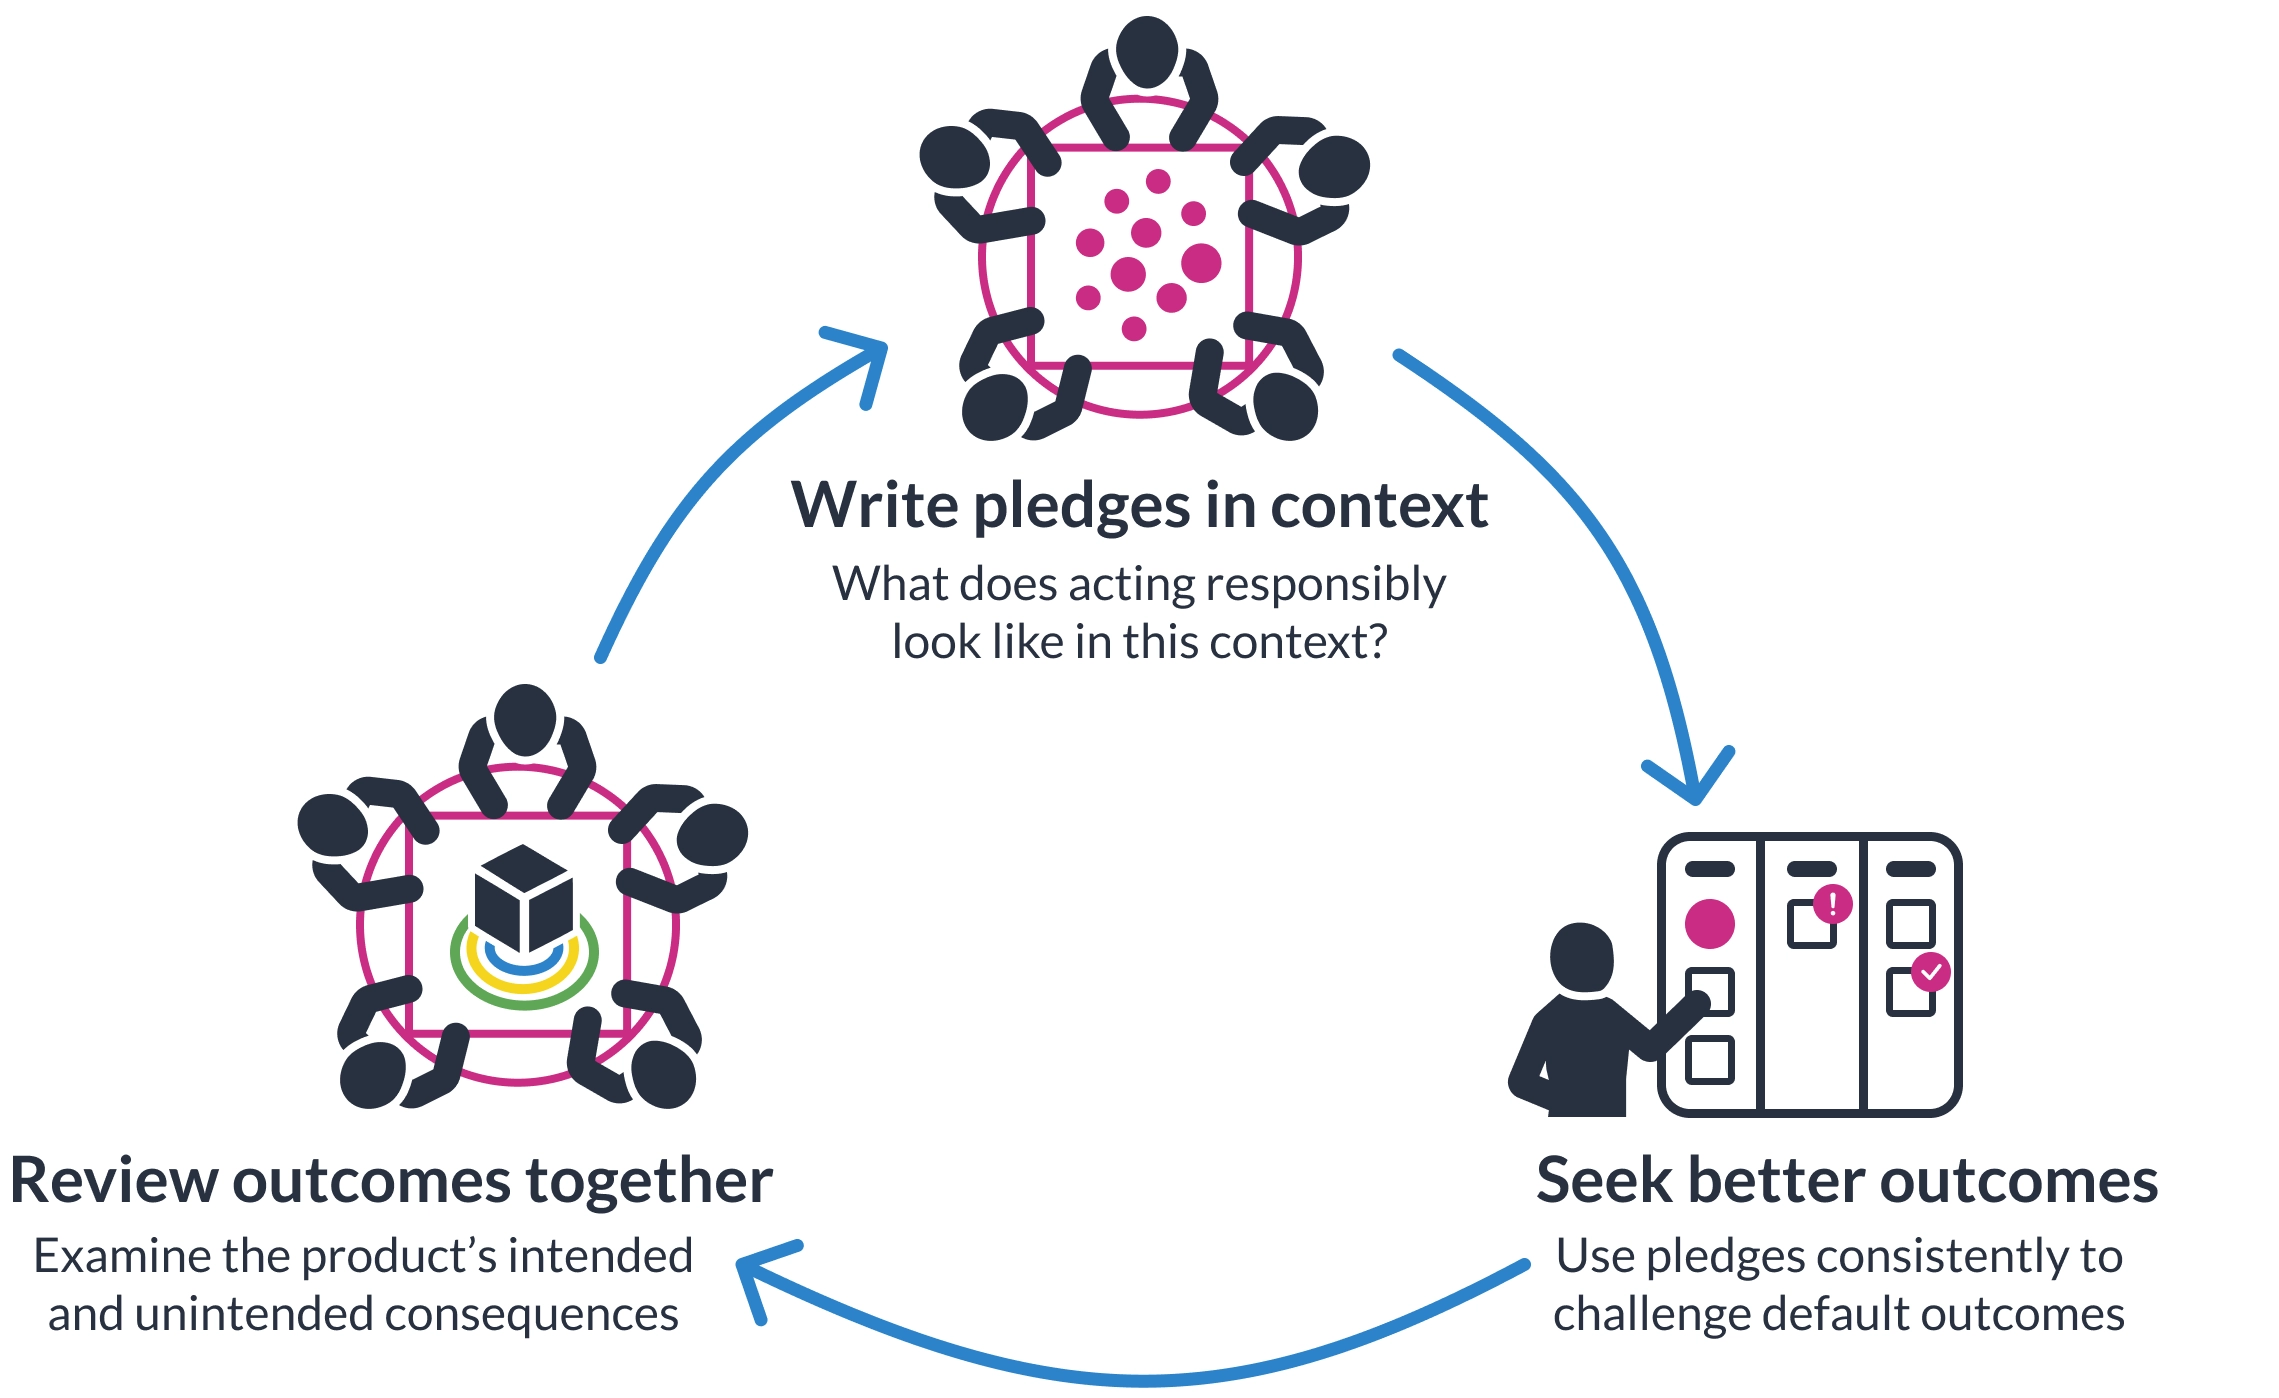 A graphic showing the implementation cycle of Pledge Works, starting from write pledges in context at the top, which leads to seek better outcomes, which in turn points to review outcomes together, forming a repeating cycle. Each of the three parts of the cycle are described in detail in the text that follows.